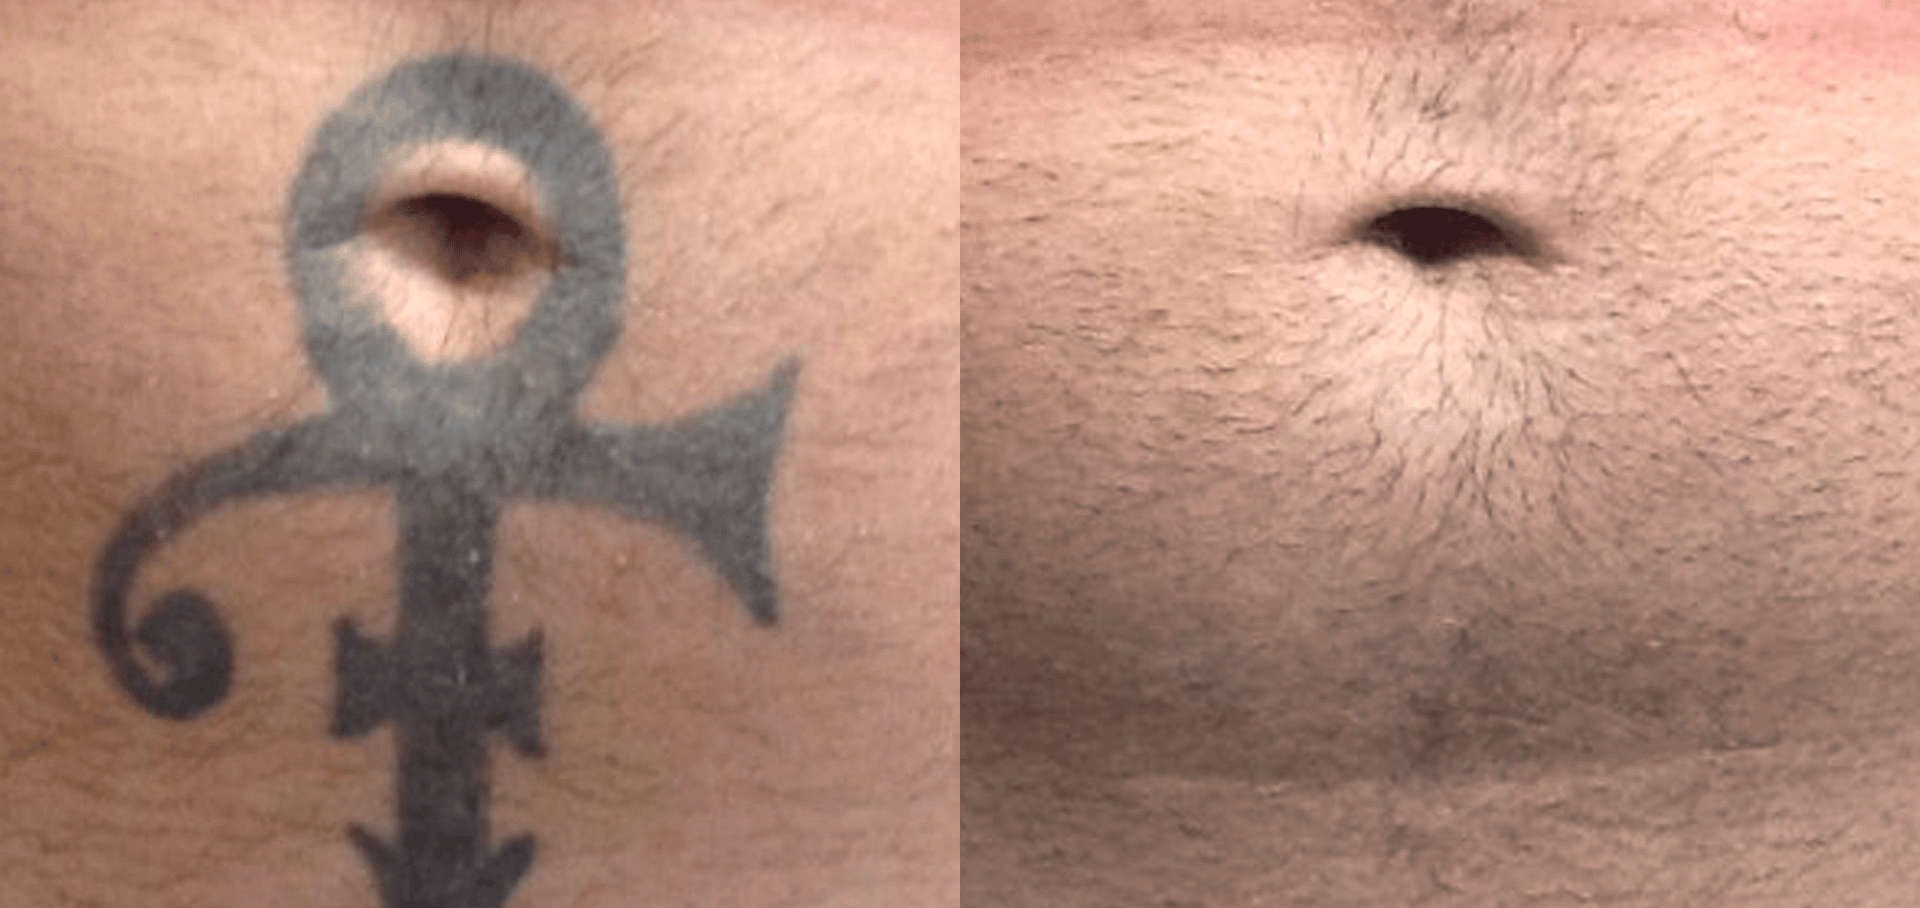 laser tattoo removal before and after 8